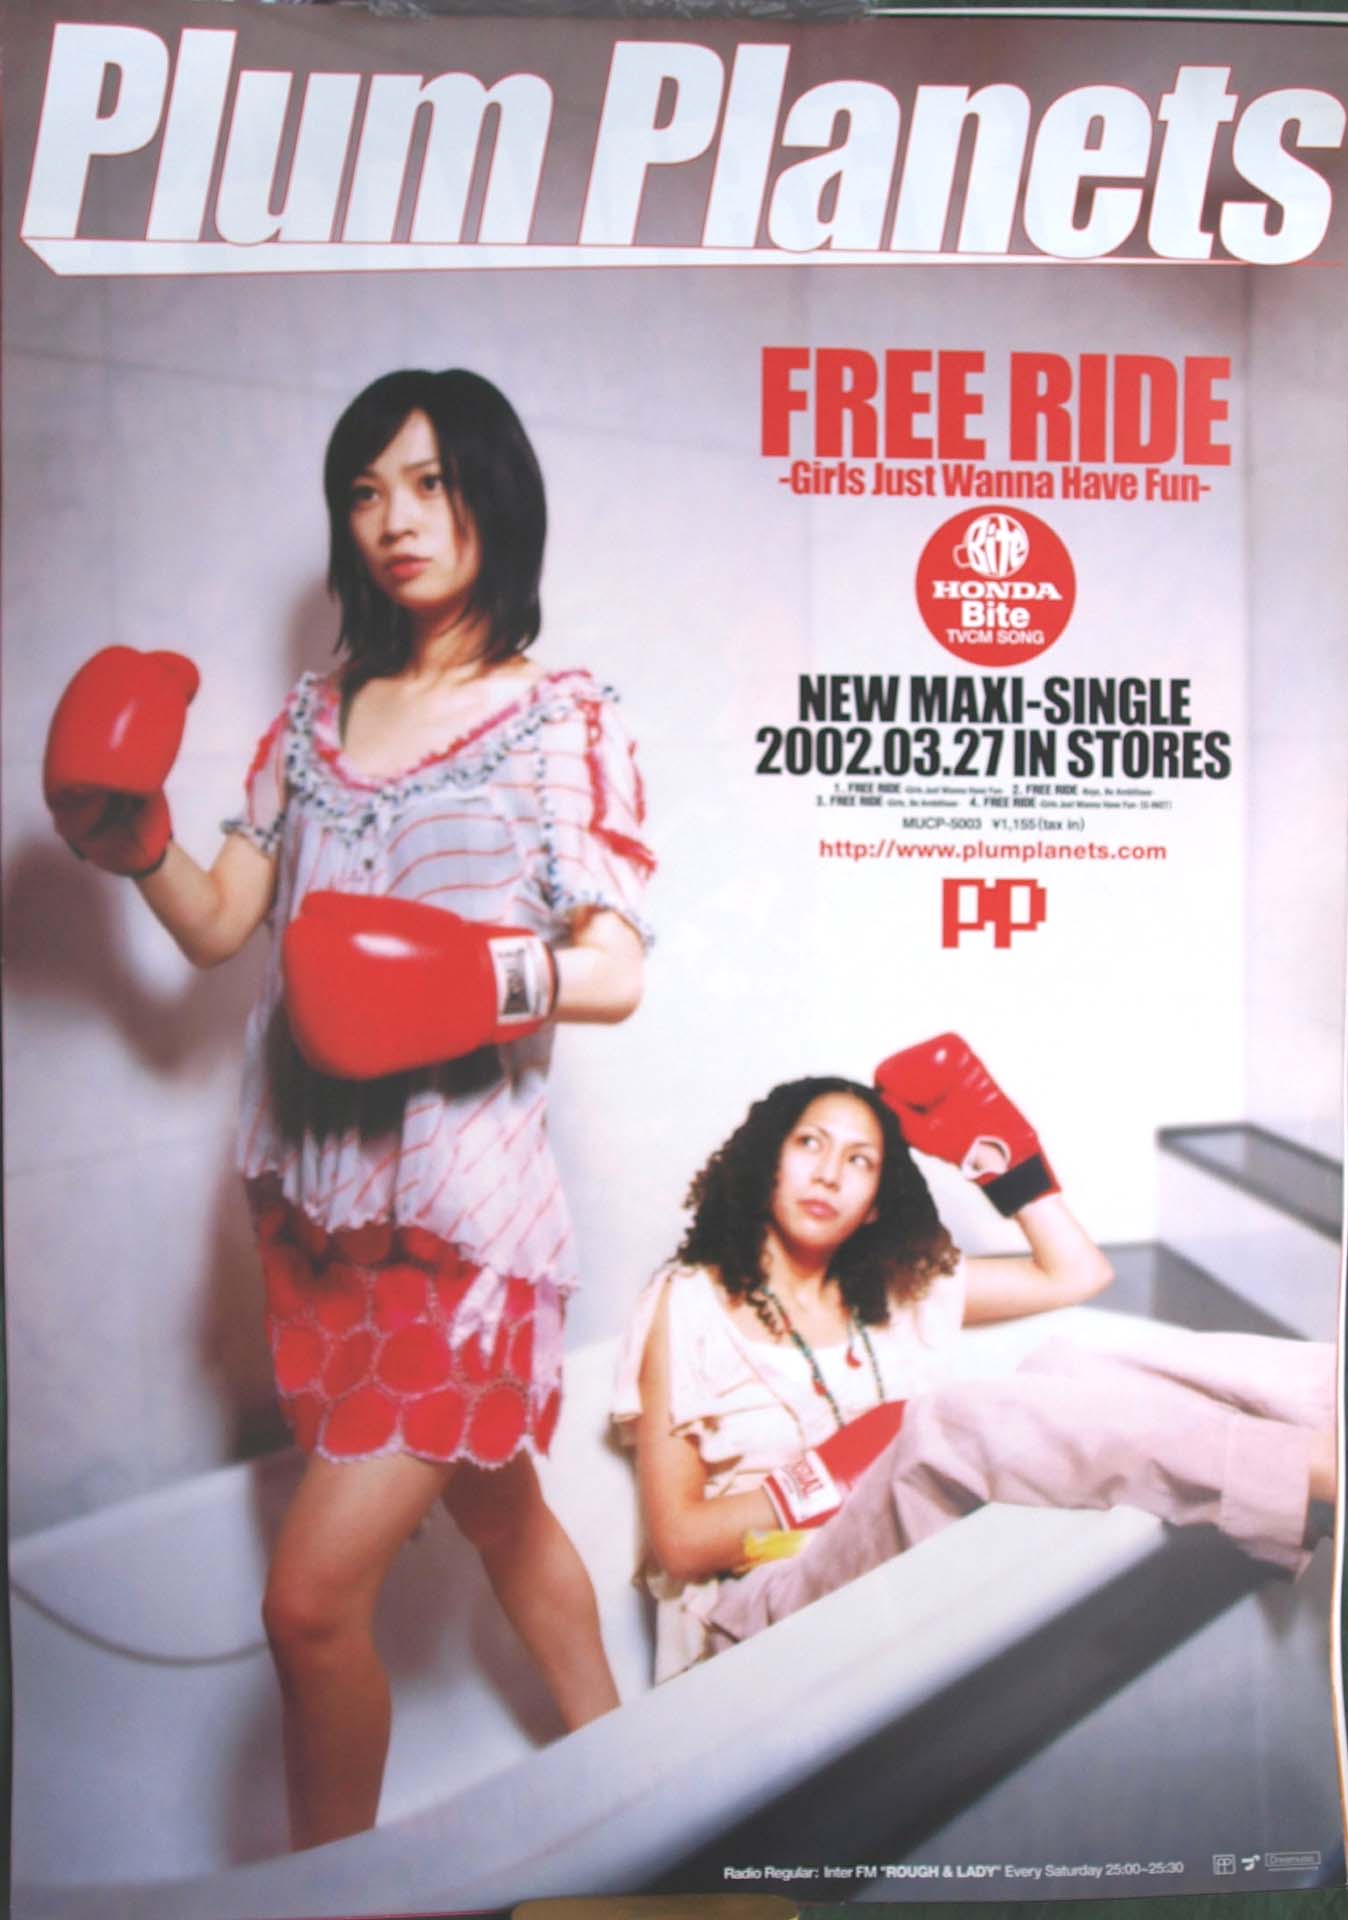 Plum Planets 「FREE RIDE−Girls Just Wanna Have Fun−」 